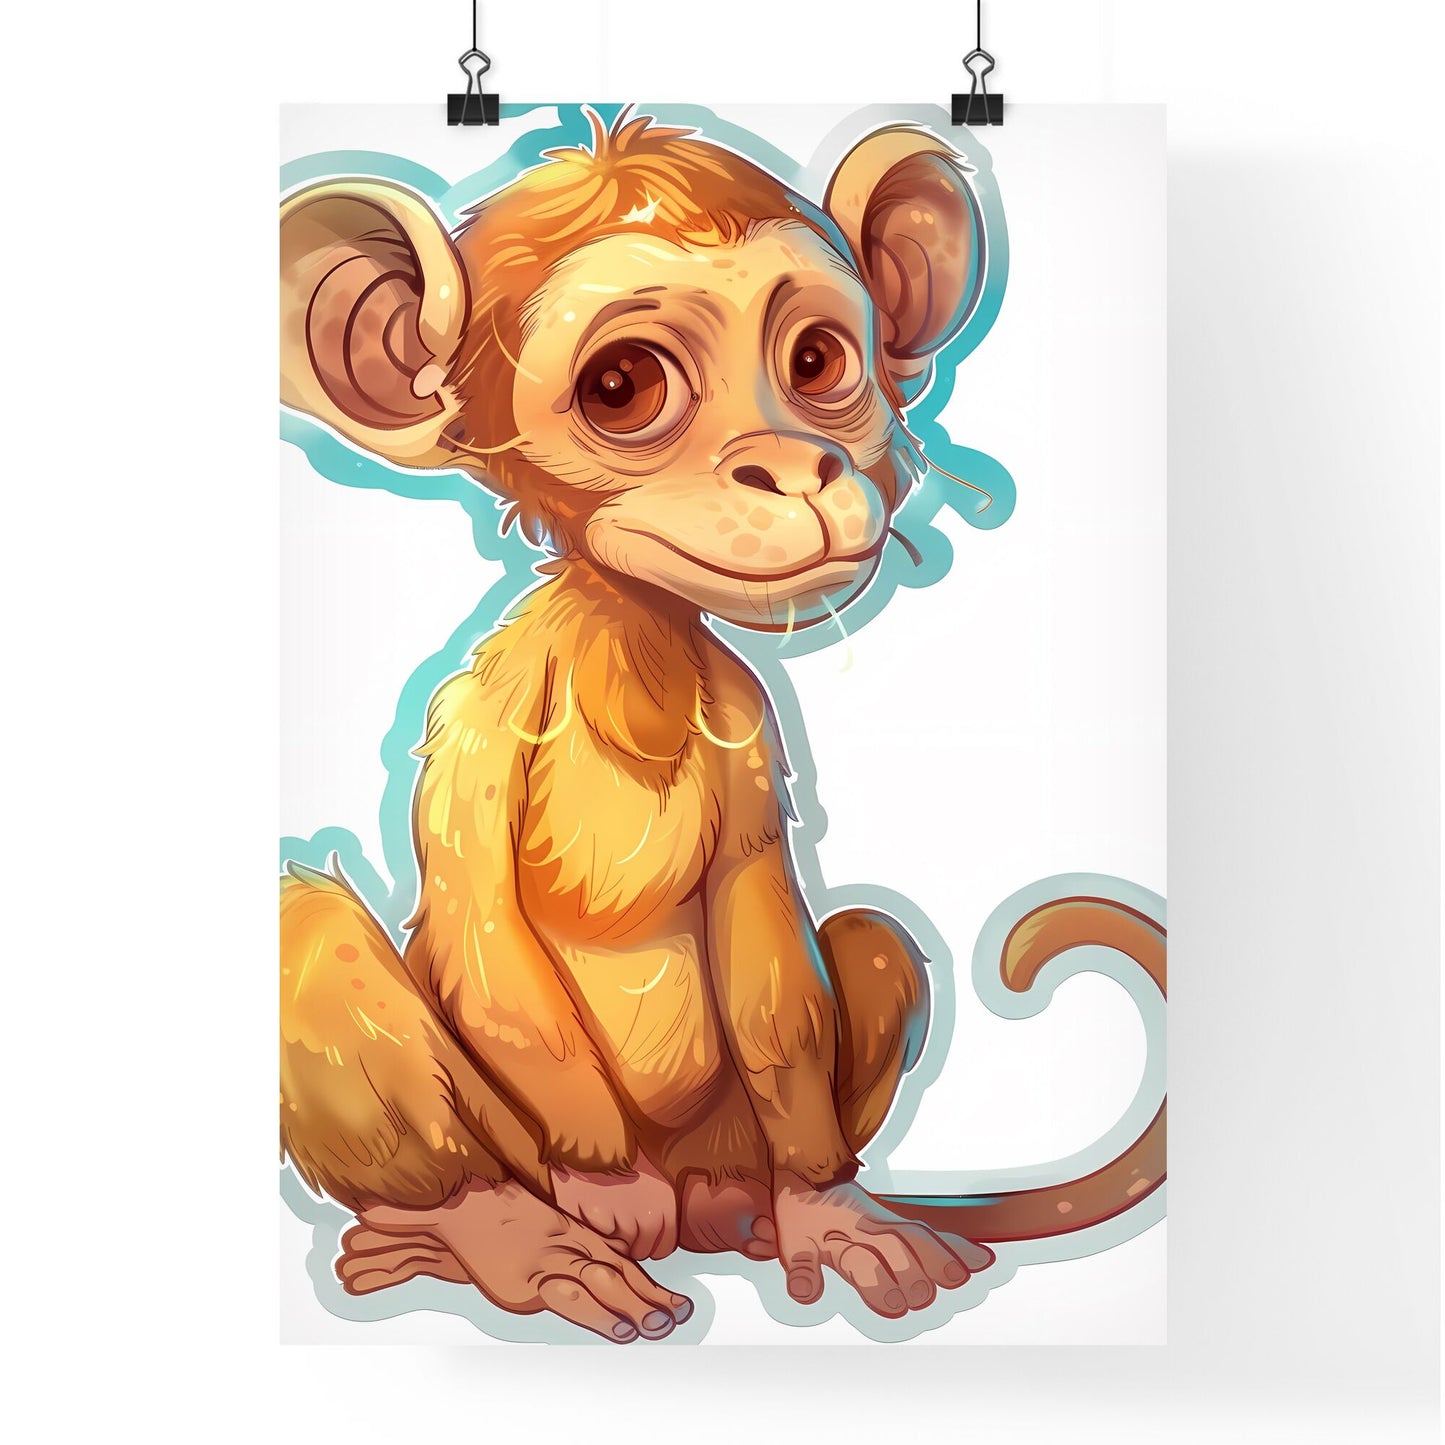 Mischievous Monkey in Vibrant Art: Humorous Animal Sticker with Simple Illustration Style, Emphasizing Expression and Pose Default Title